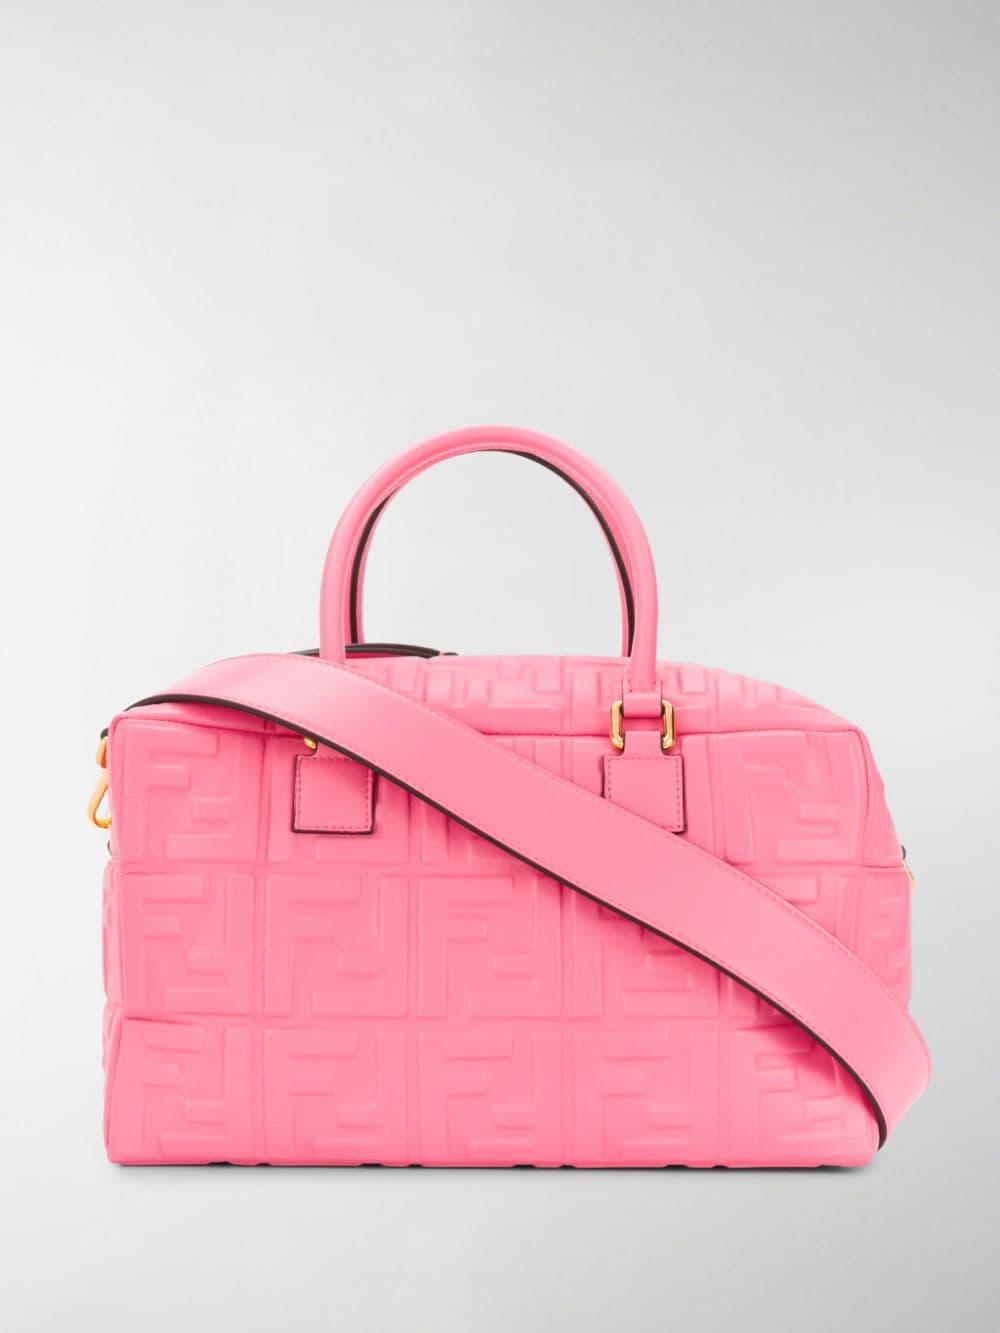 Fendi Leather Boston Small Tote Bag in Pink - Lyst